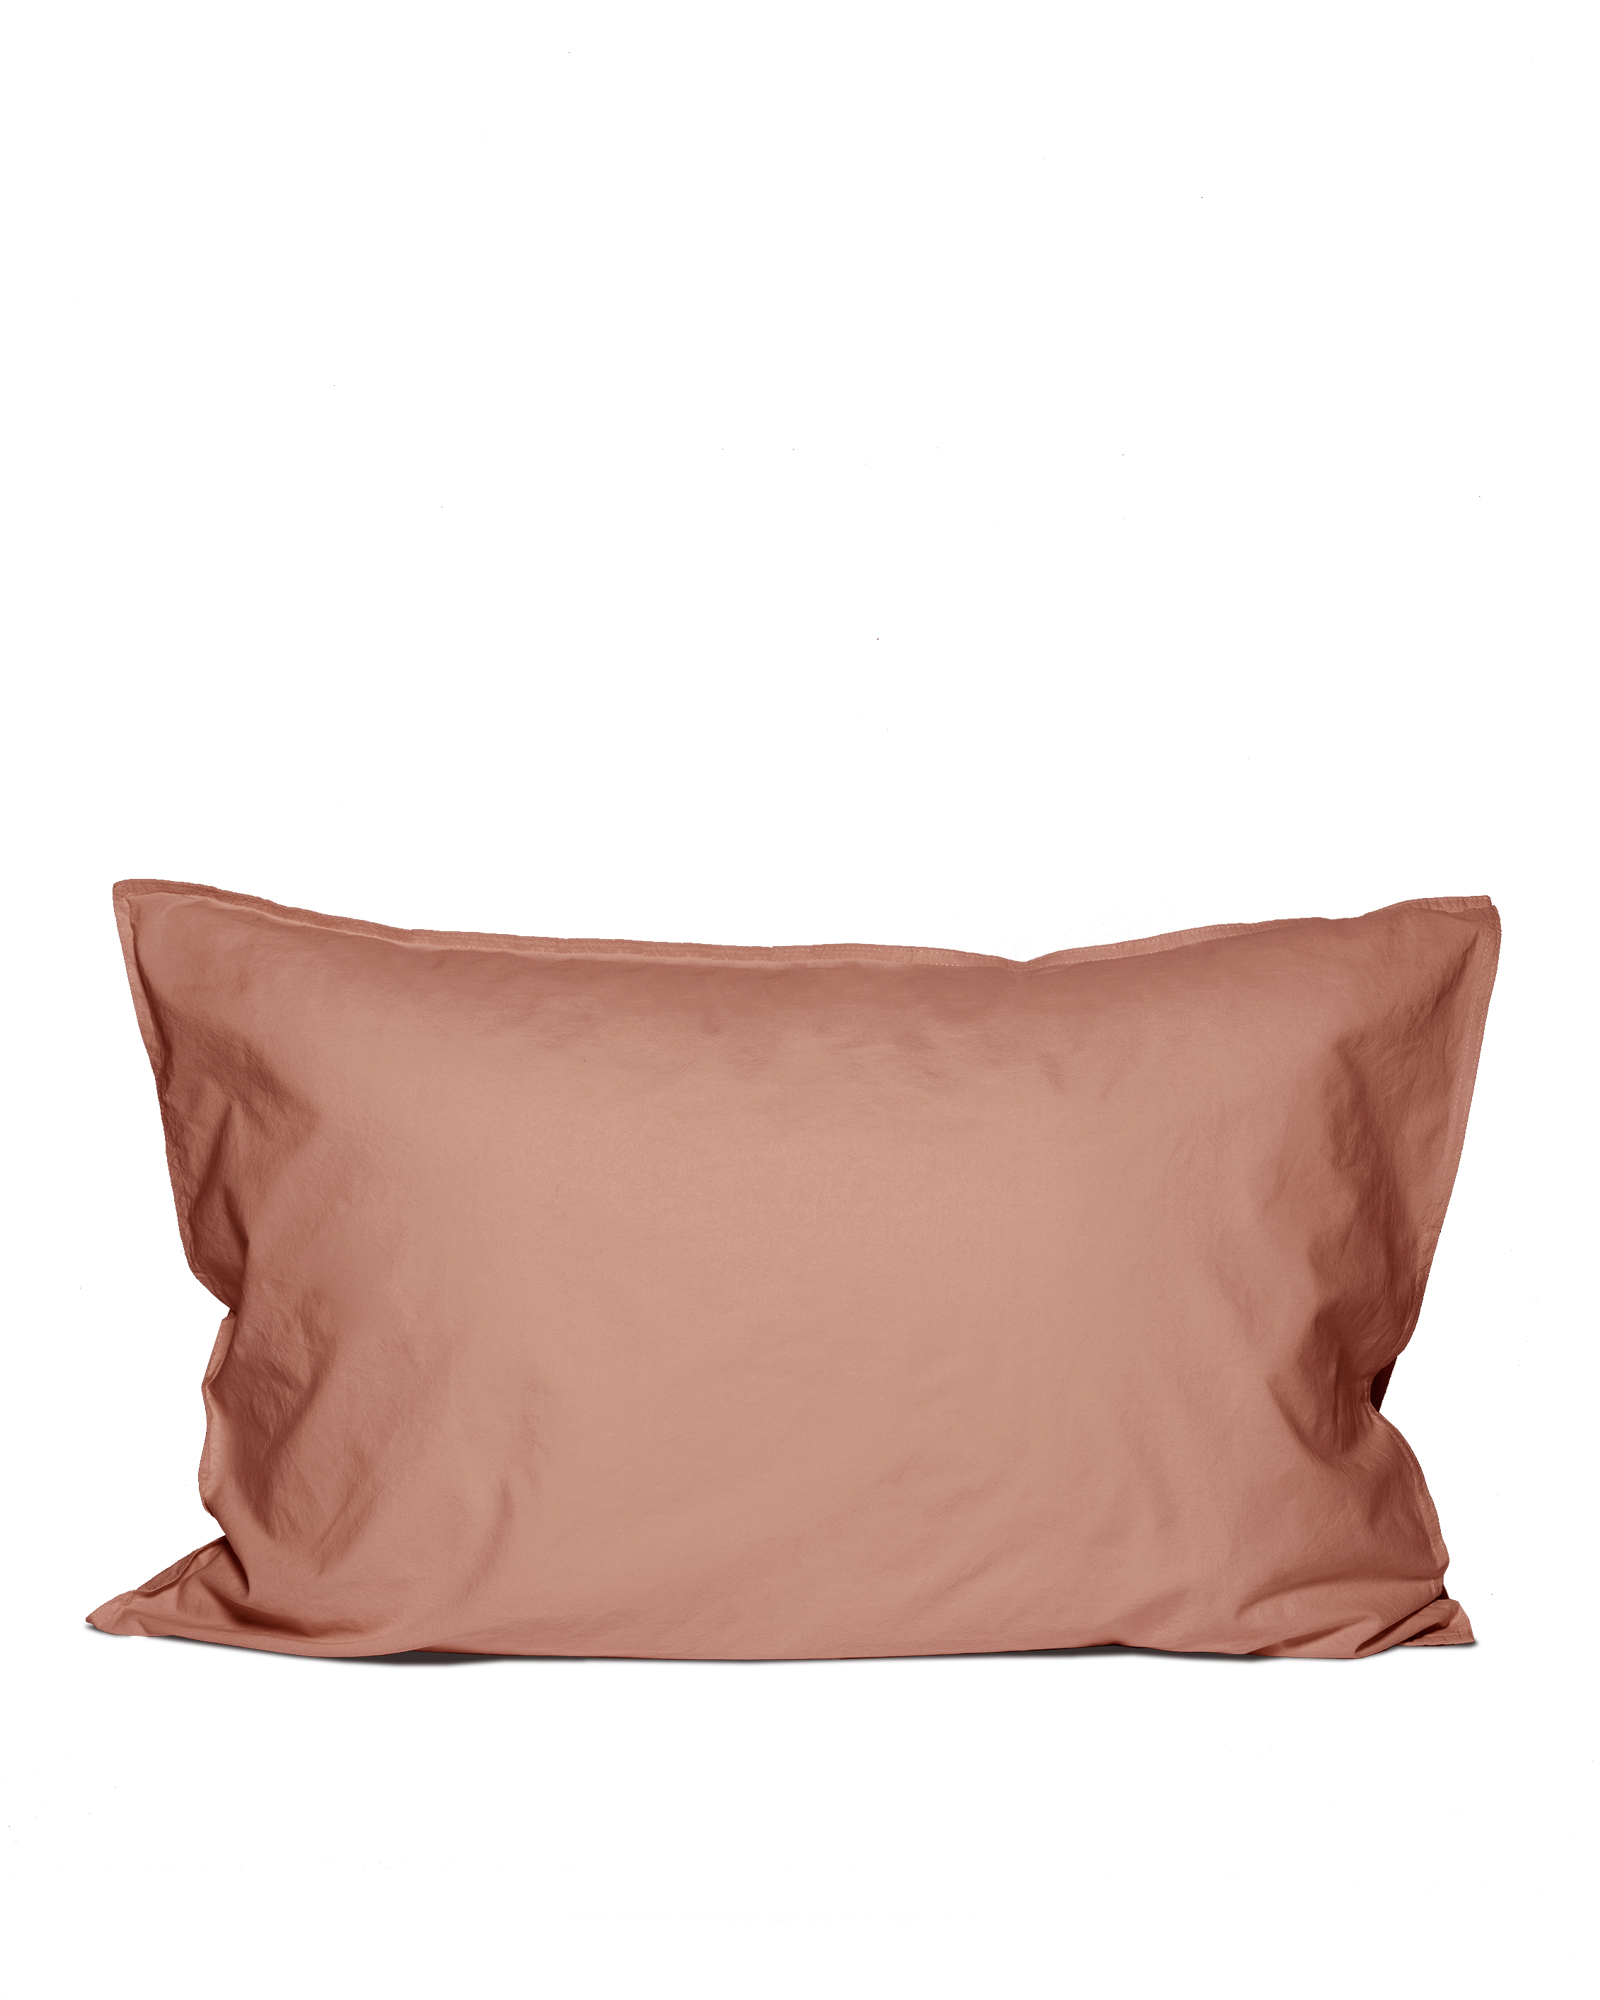 MARIE-MARIE - Pillowcase VINTAGE COTTON Rosewood - 50x75 cm - Rosewood